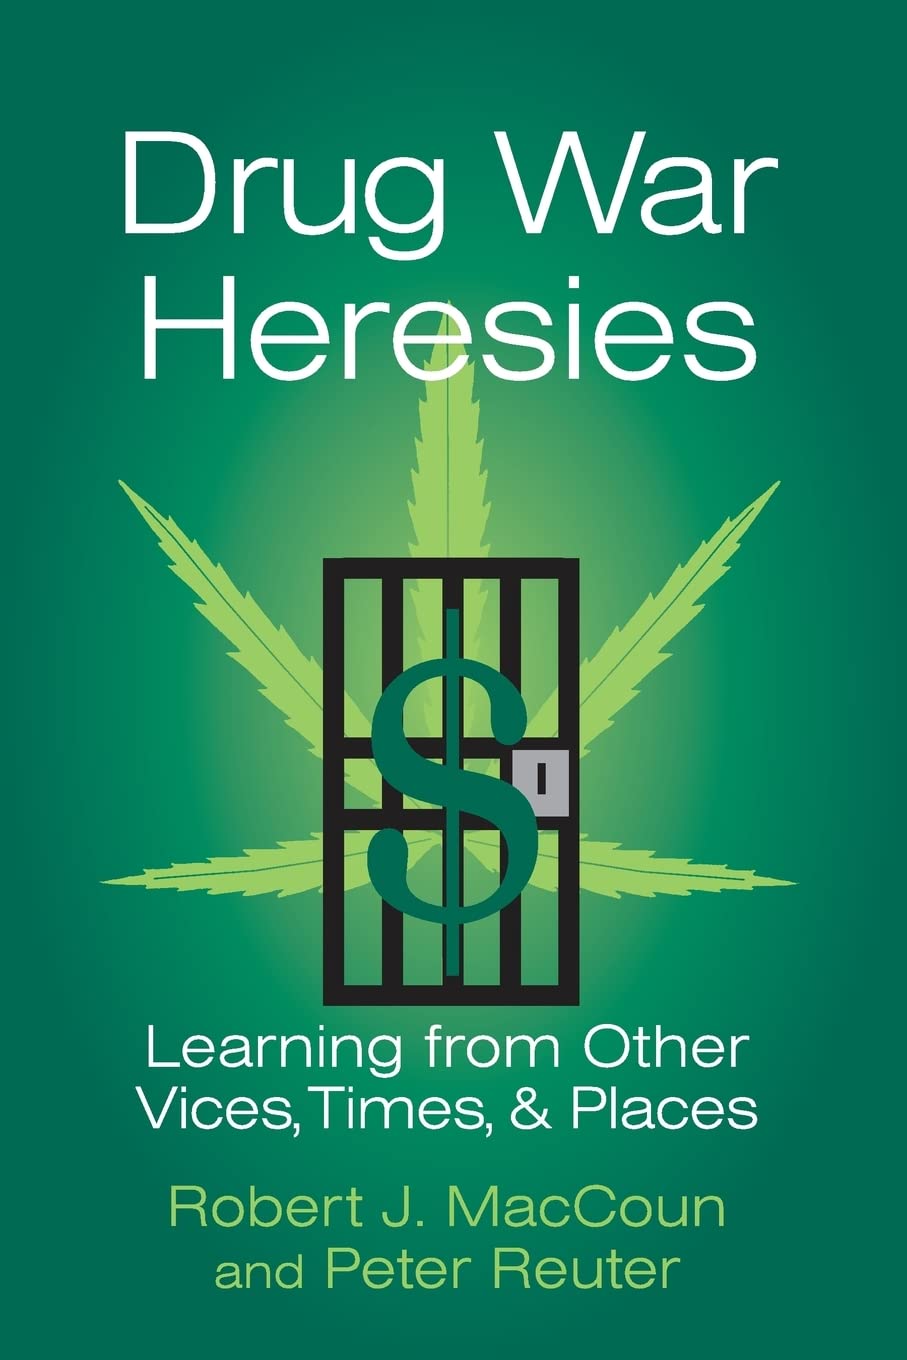 Drug War Heresies: Learning from Other Vices, Times, and Places (RAND Studies in Policy Analysis) [Paperback] MacCoun, Robert J. and Reuter, Peter